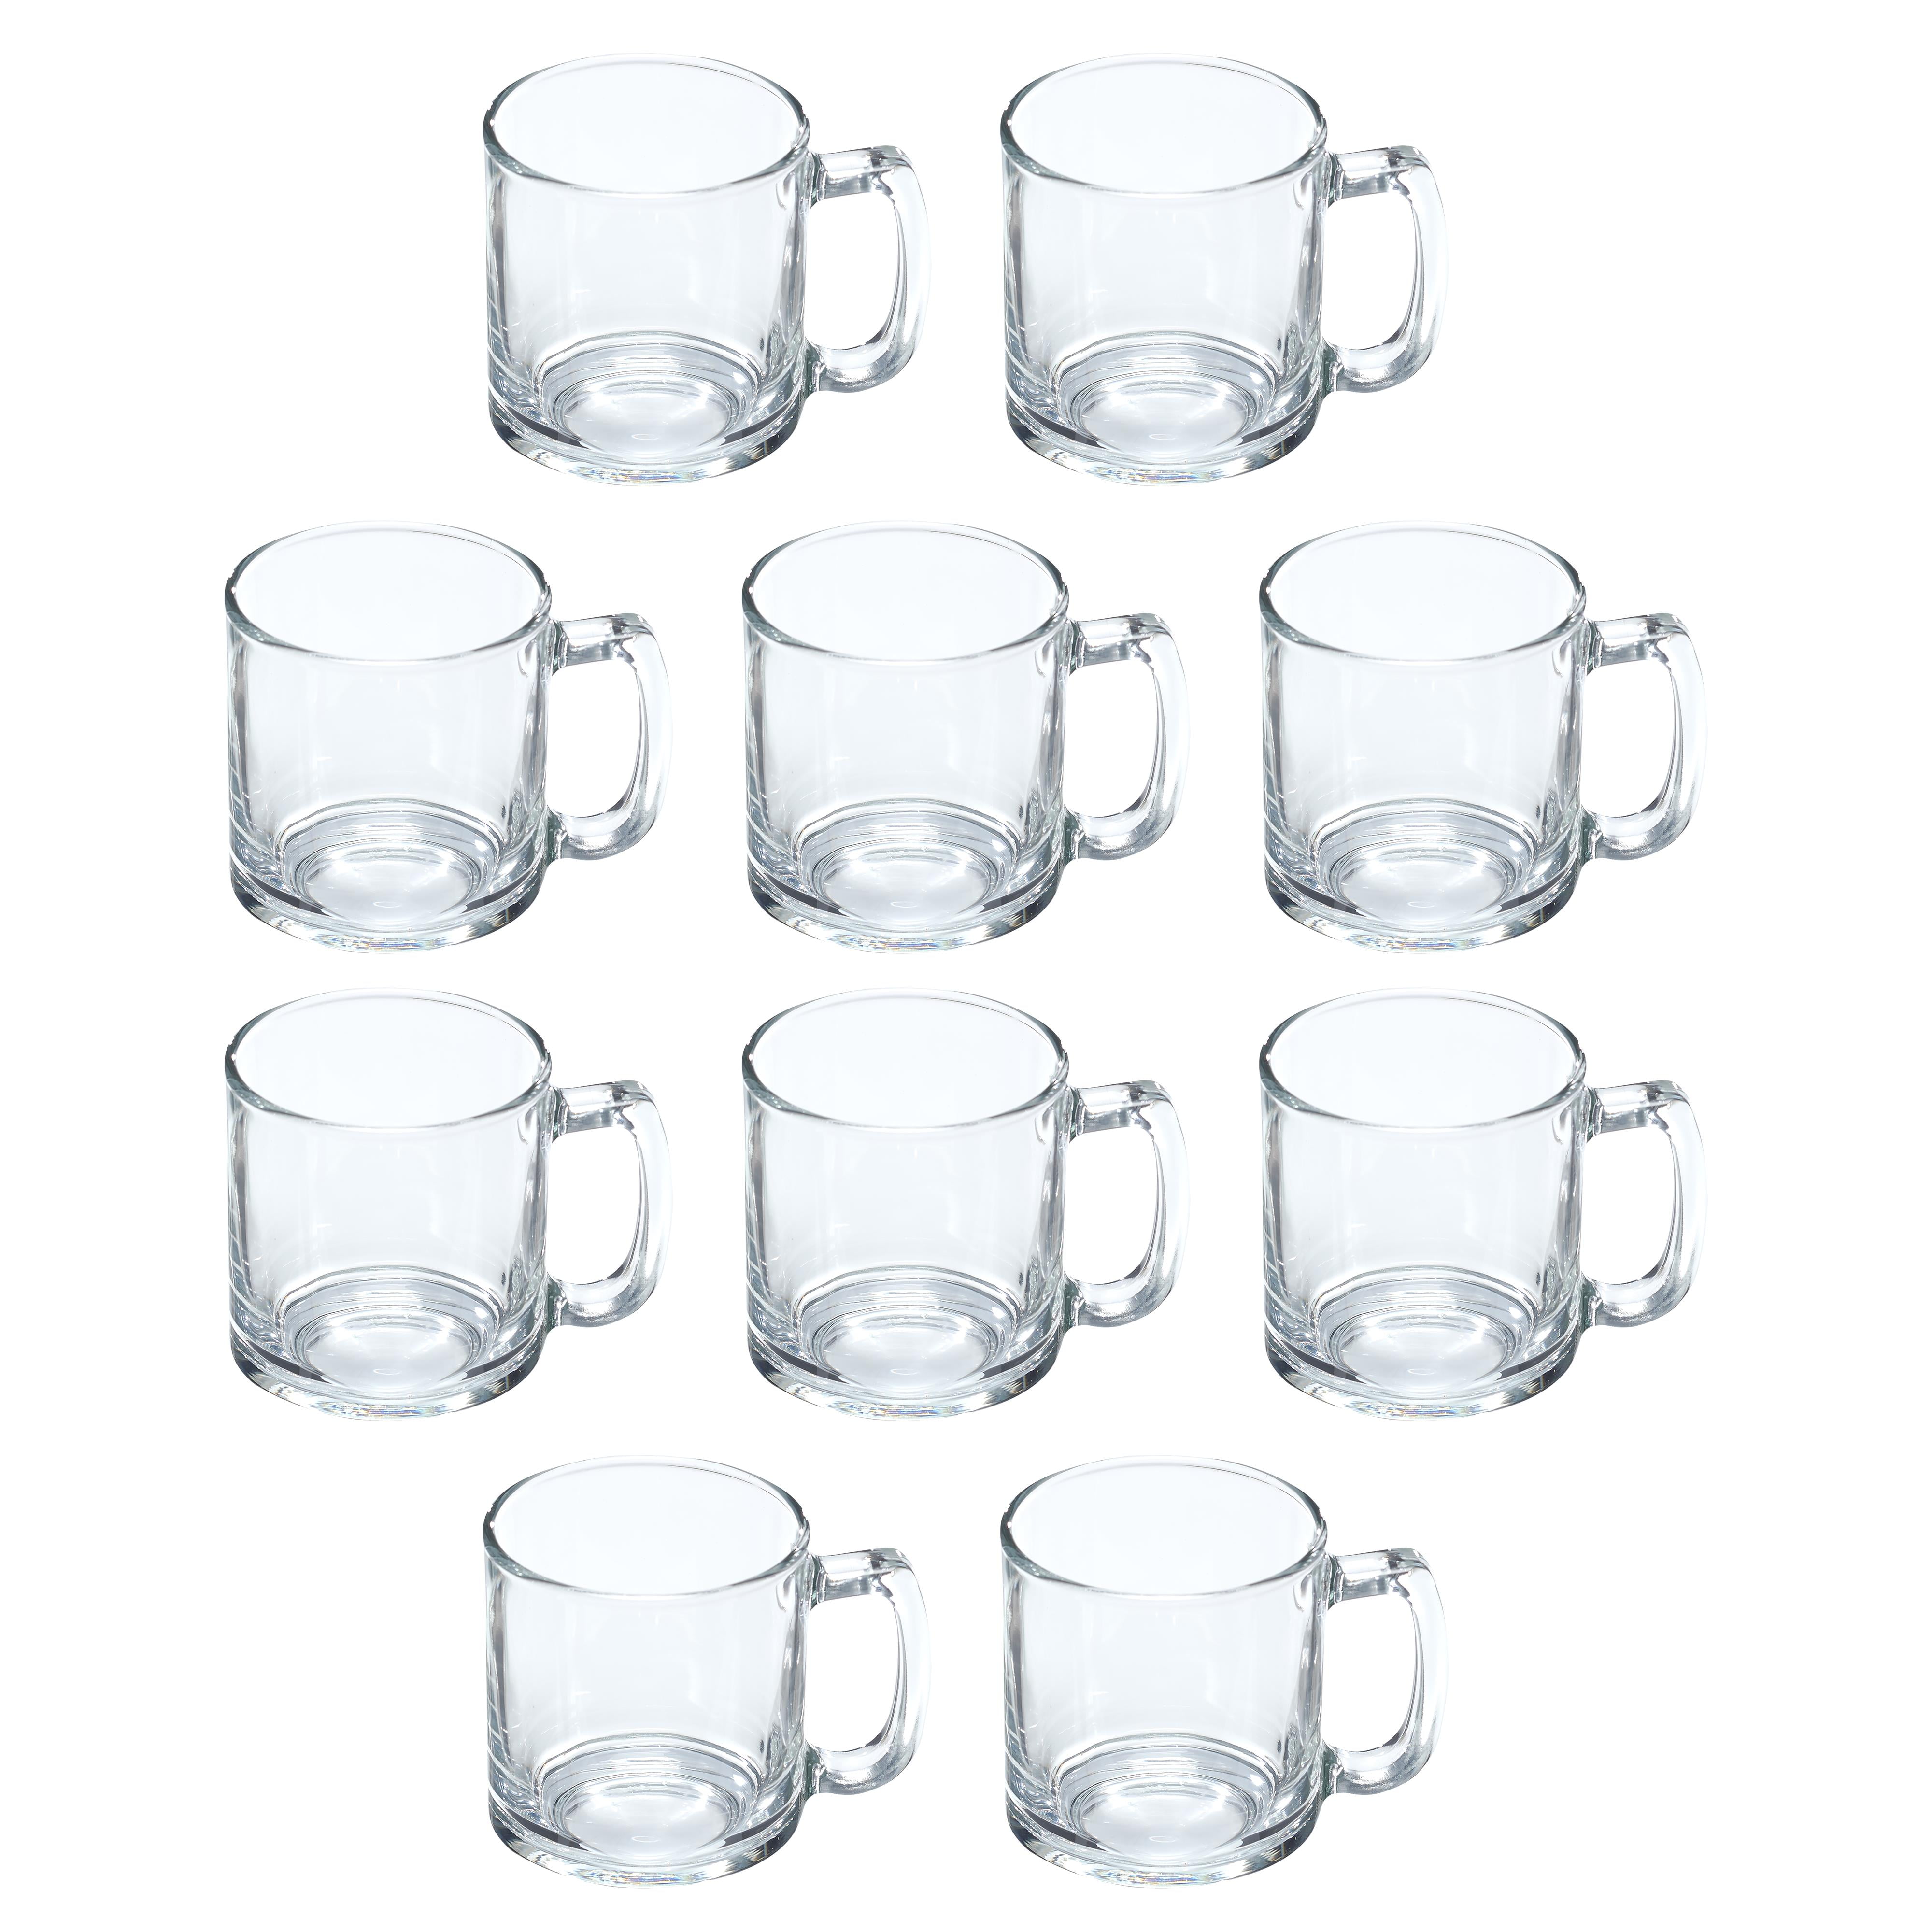 Wholesale Glass Coffee Mugs 12Oz Clear Glass With Handle